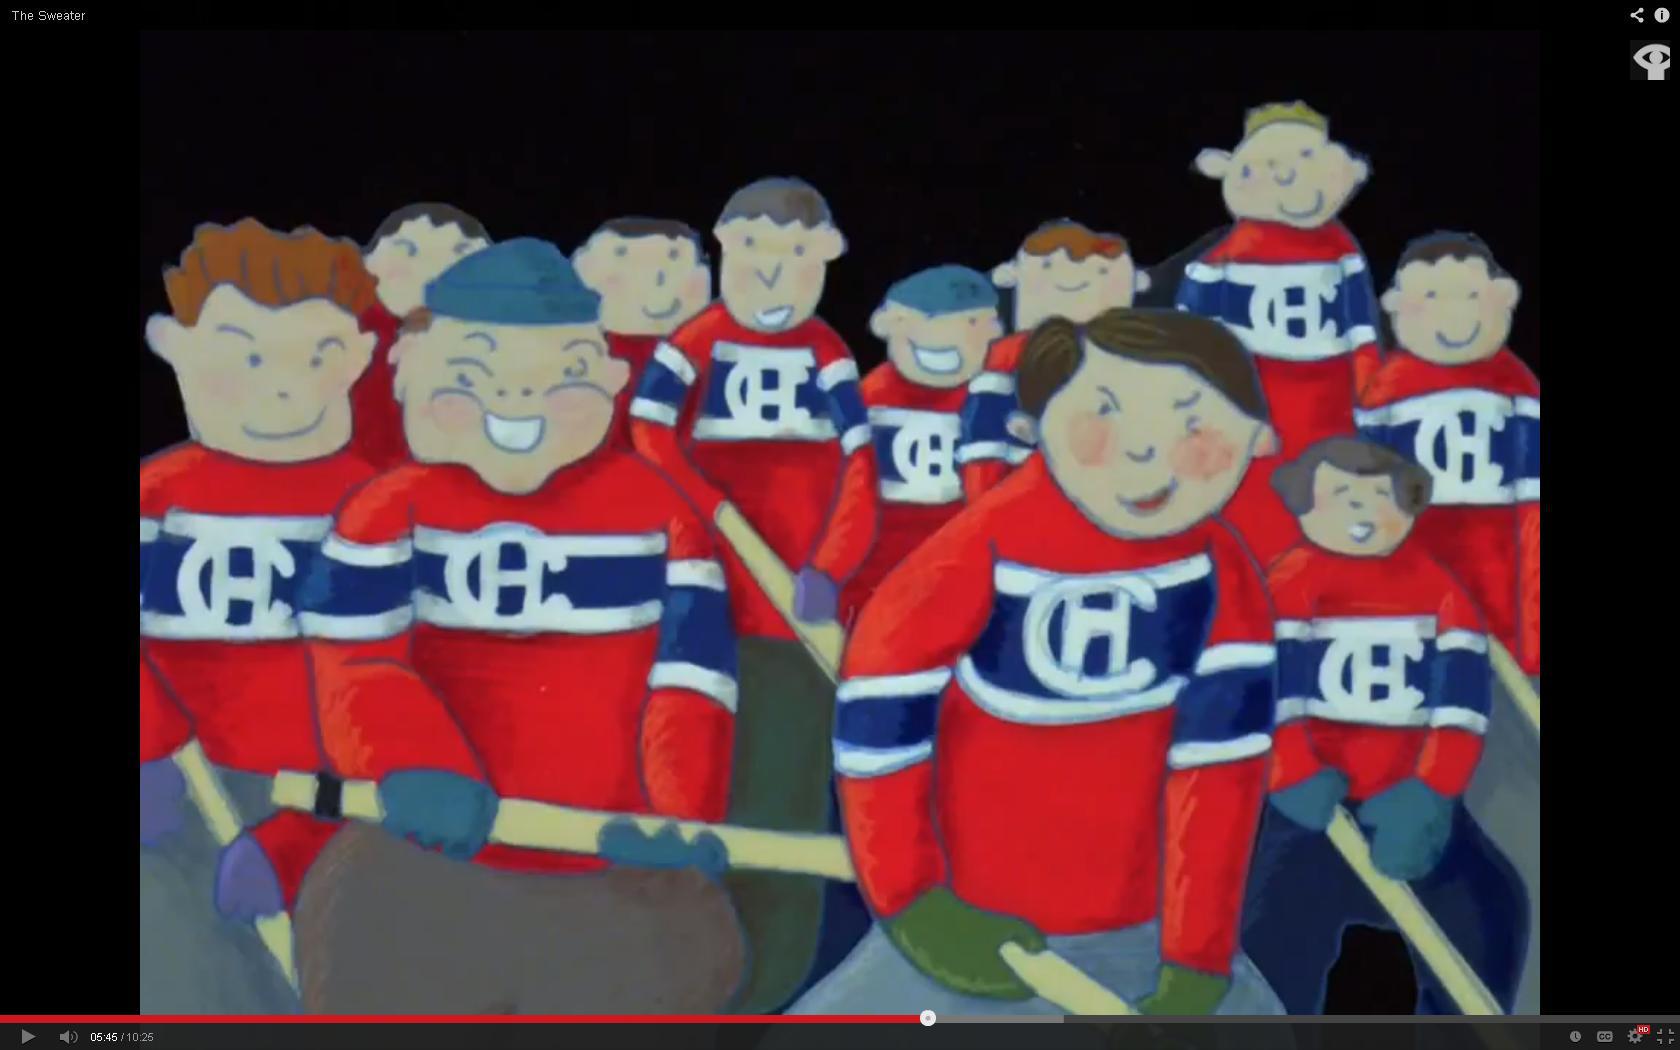 Montreal Canadiens explain the story behind their Winter Classic jersey -  Montreal